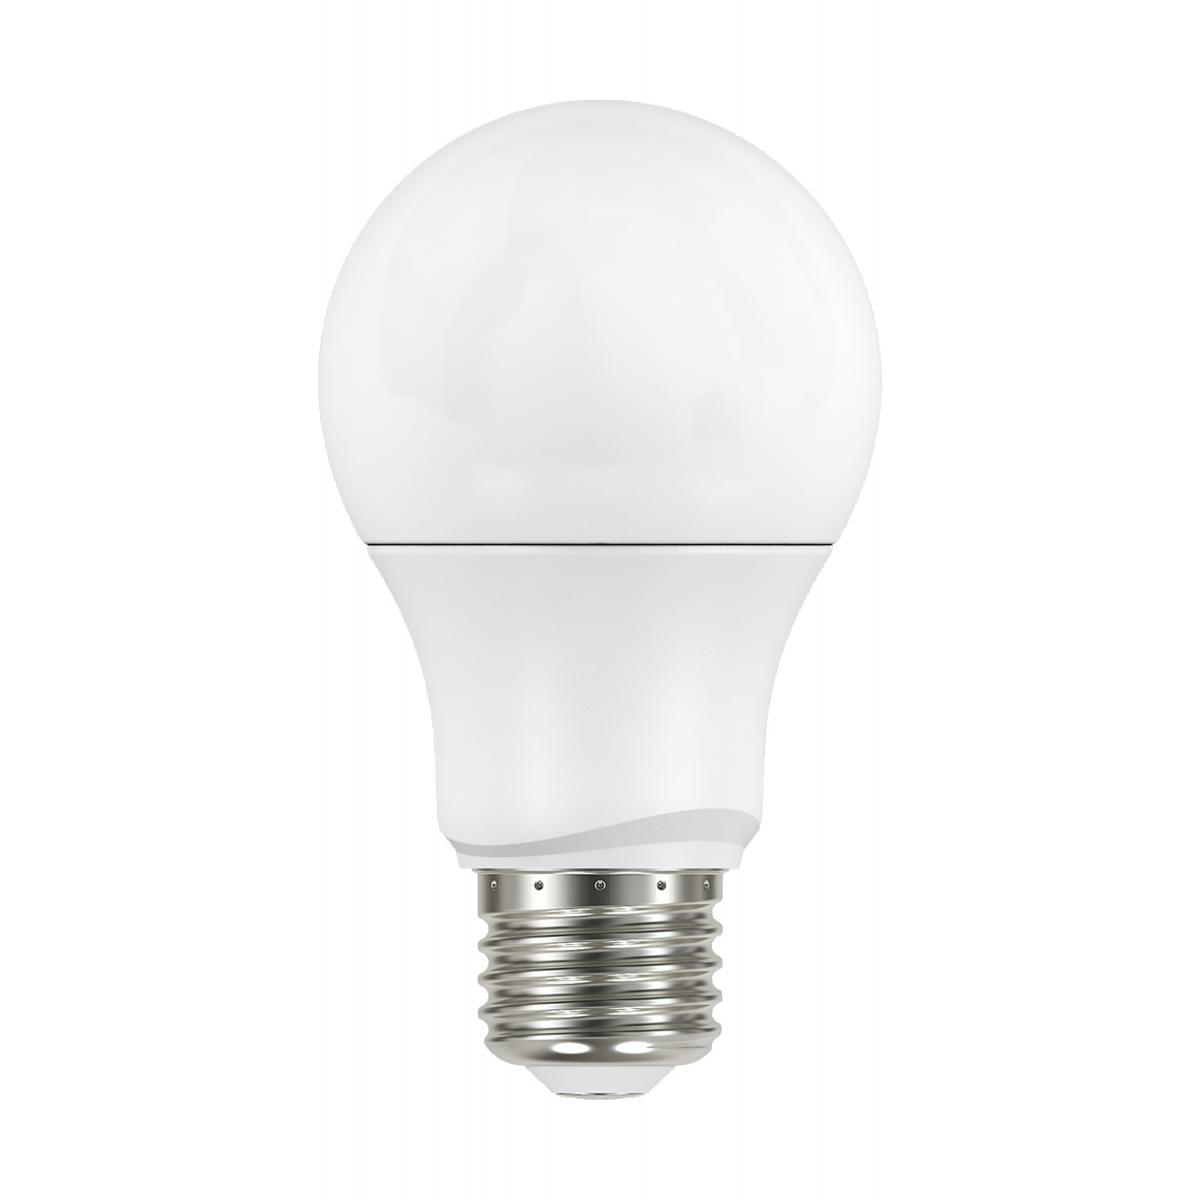 TopNotch™ T3 G4 Bi-Pin 107D LED Light Bulb -Water Resistant (Dimmable)